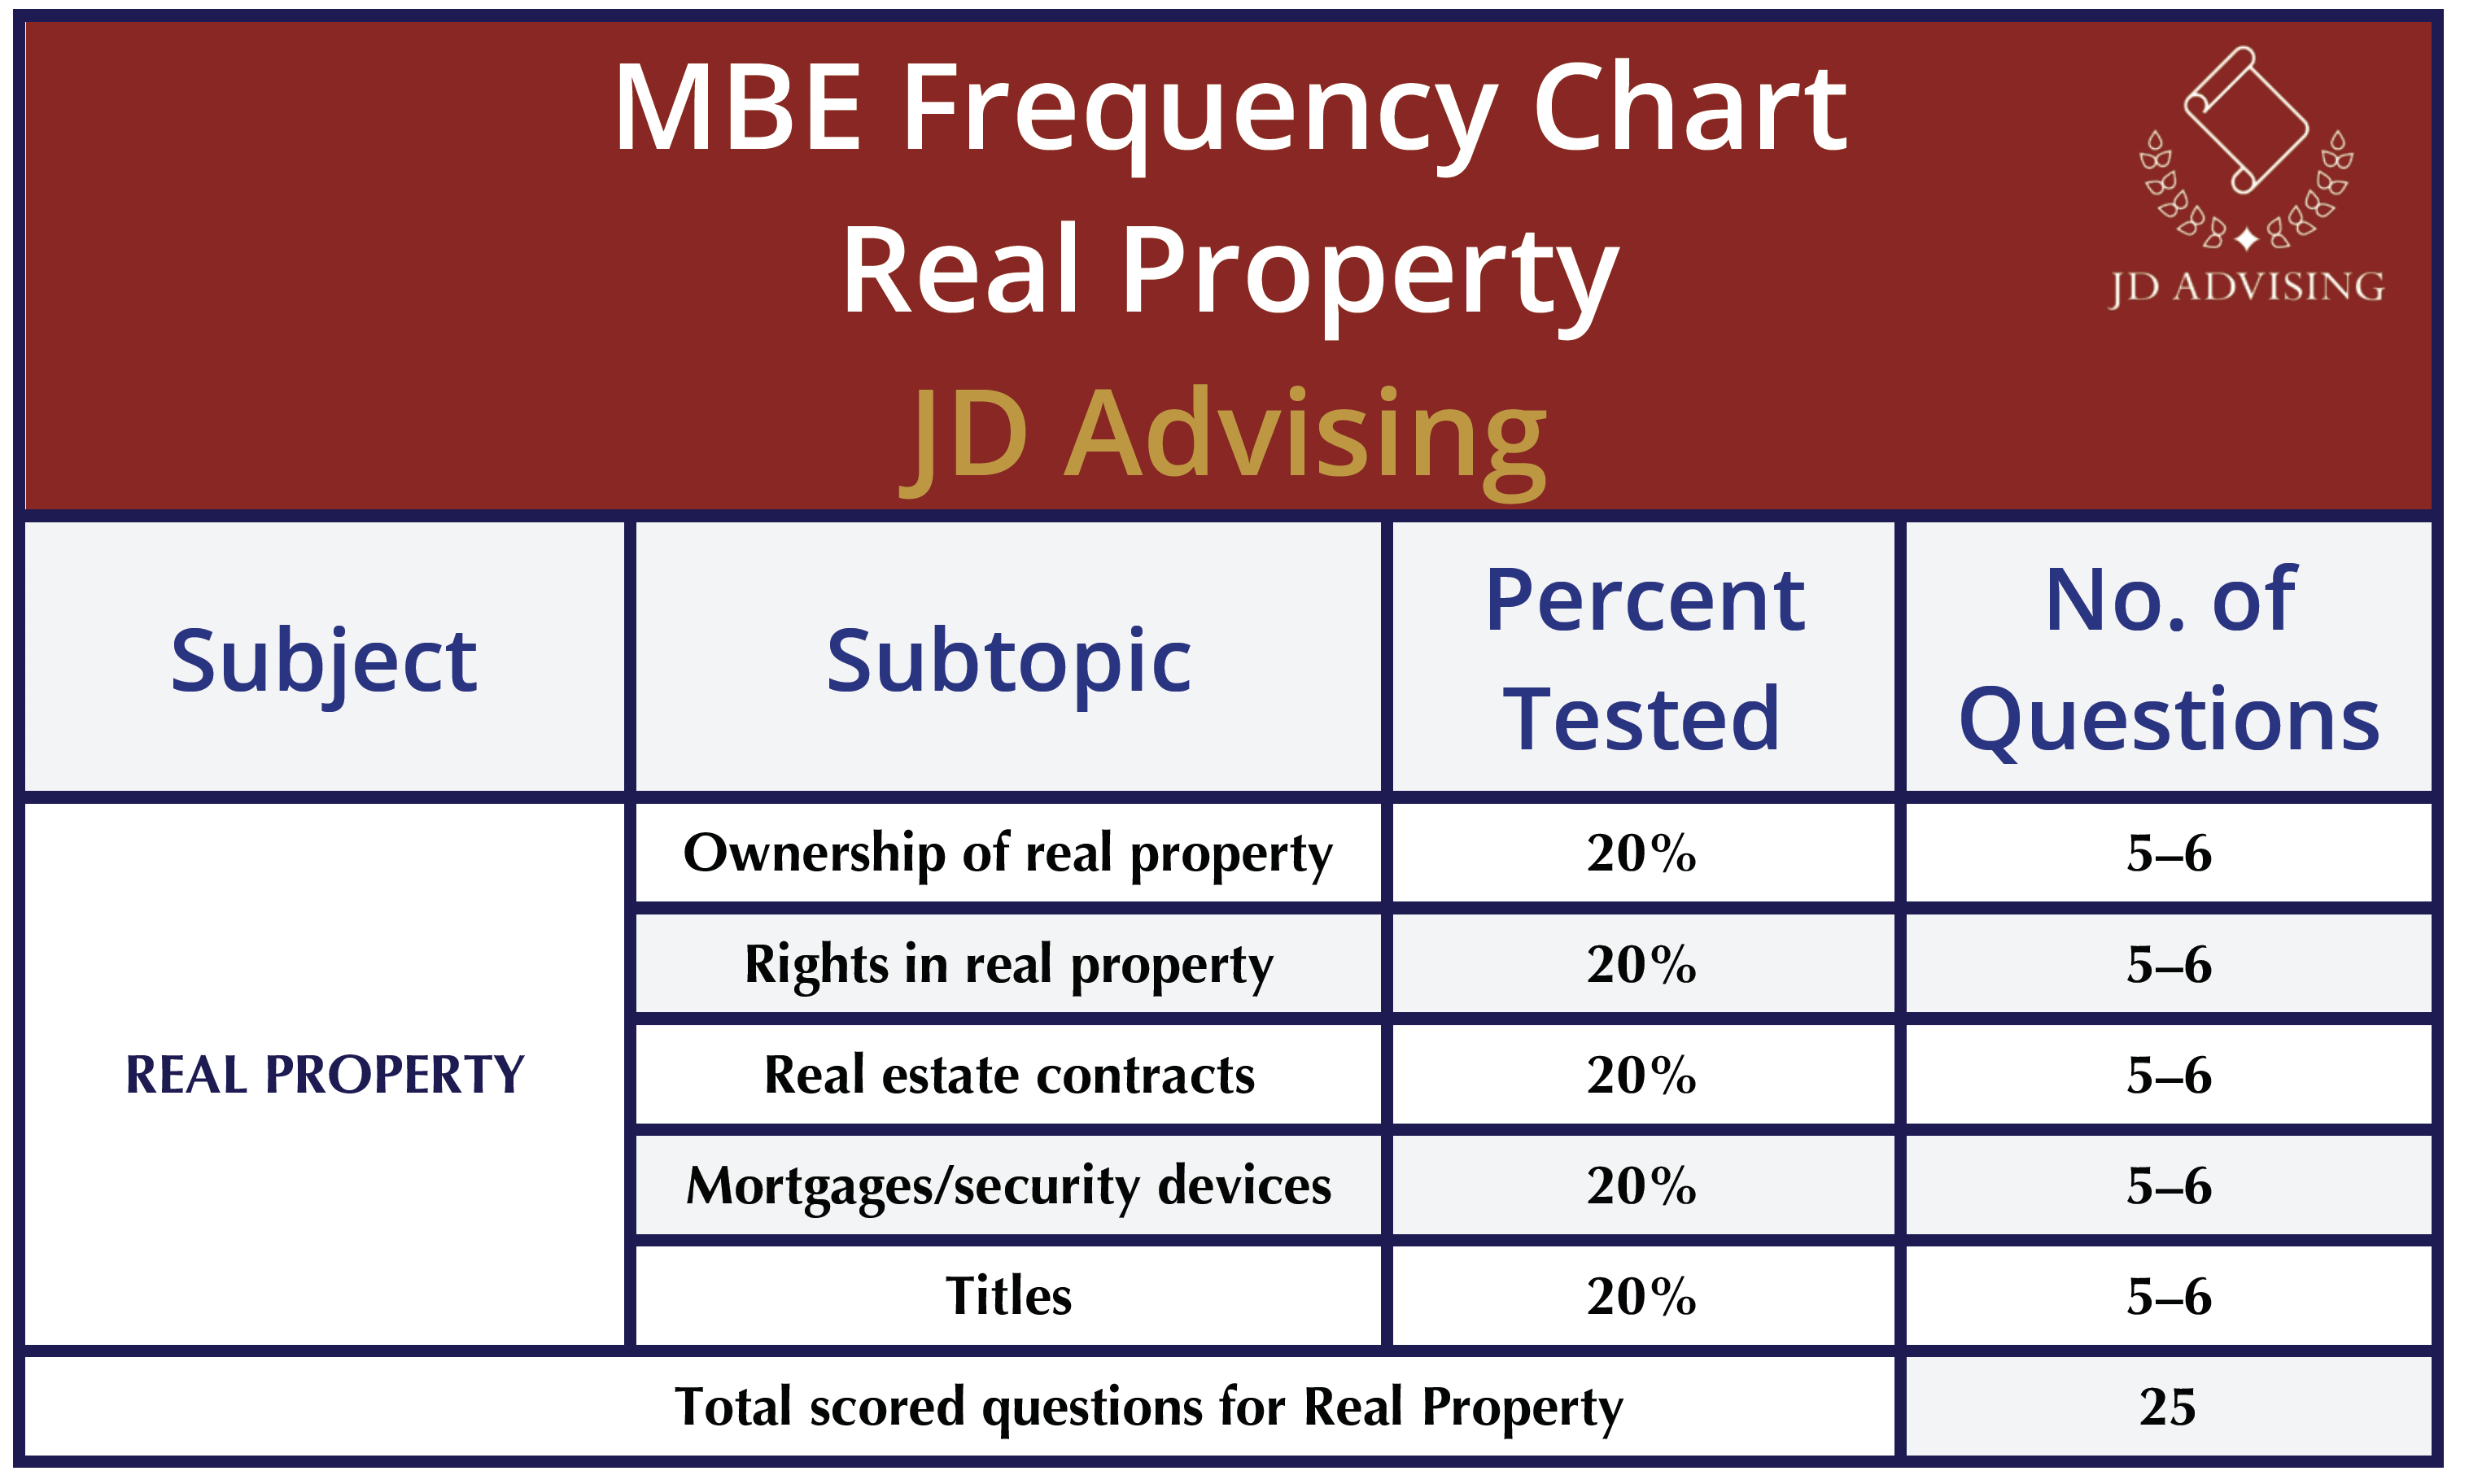 Real Property MBE frequency chart